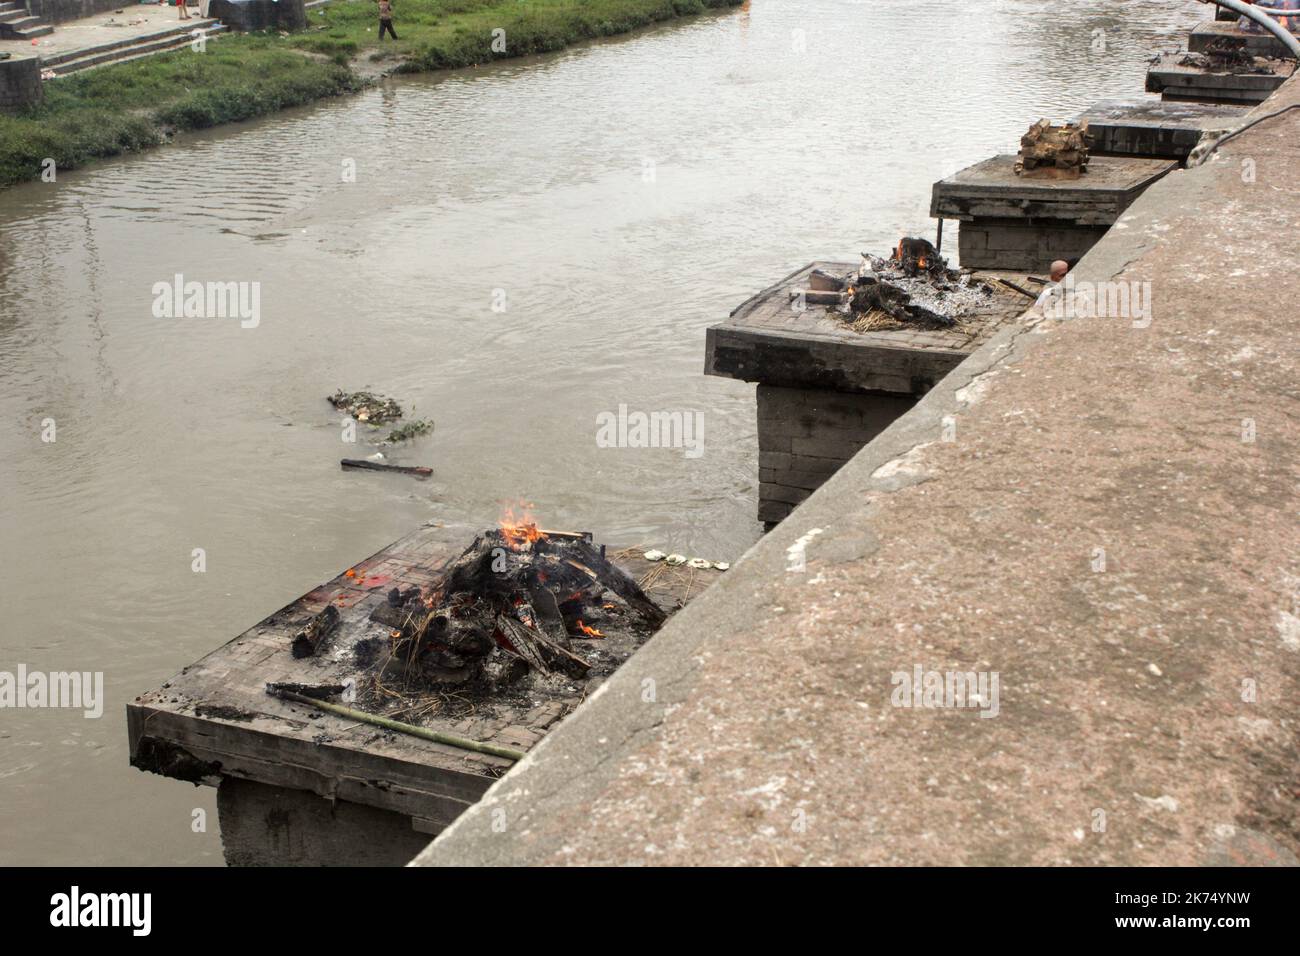 This temple is used primarily for outdoor cremation of the dead. The bodies are transported 24 hours after the death to the temple and then burned for 3 hours before seeing ashes thrown into the Bagmati River that runs through the temple. Only members of the royal family are cremated directly in front of the temple of Pashupatinath. Stock Photo